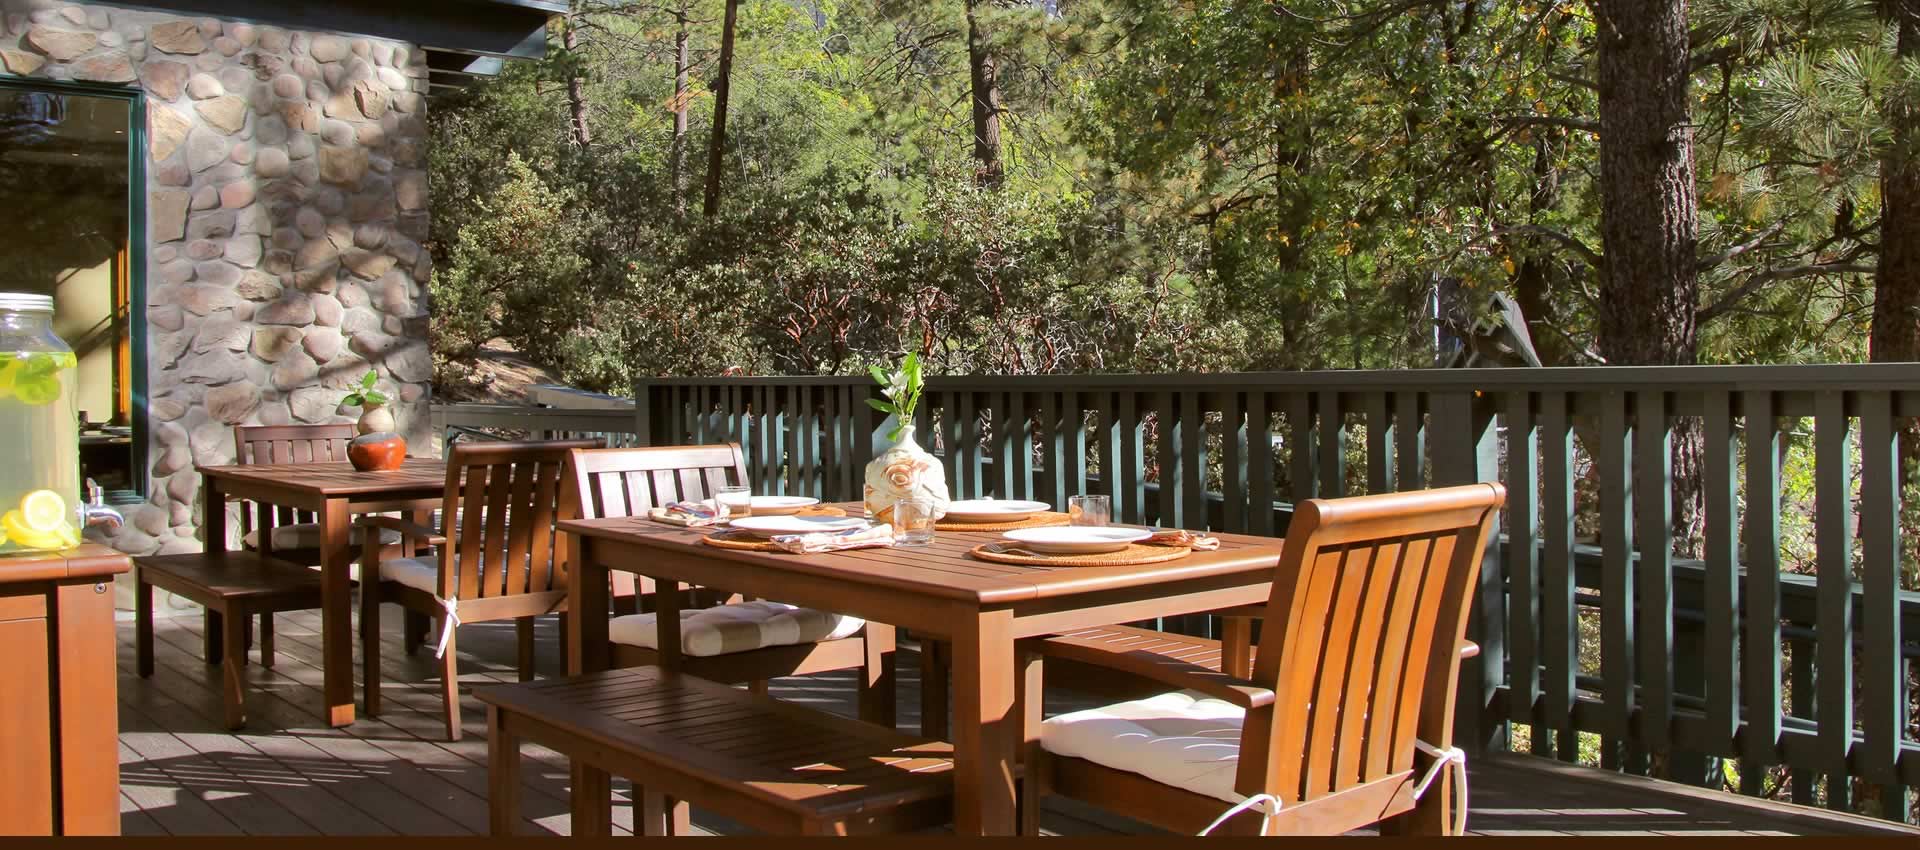 Grand Idyllwild Lodge deck with dining tables and chairs